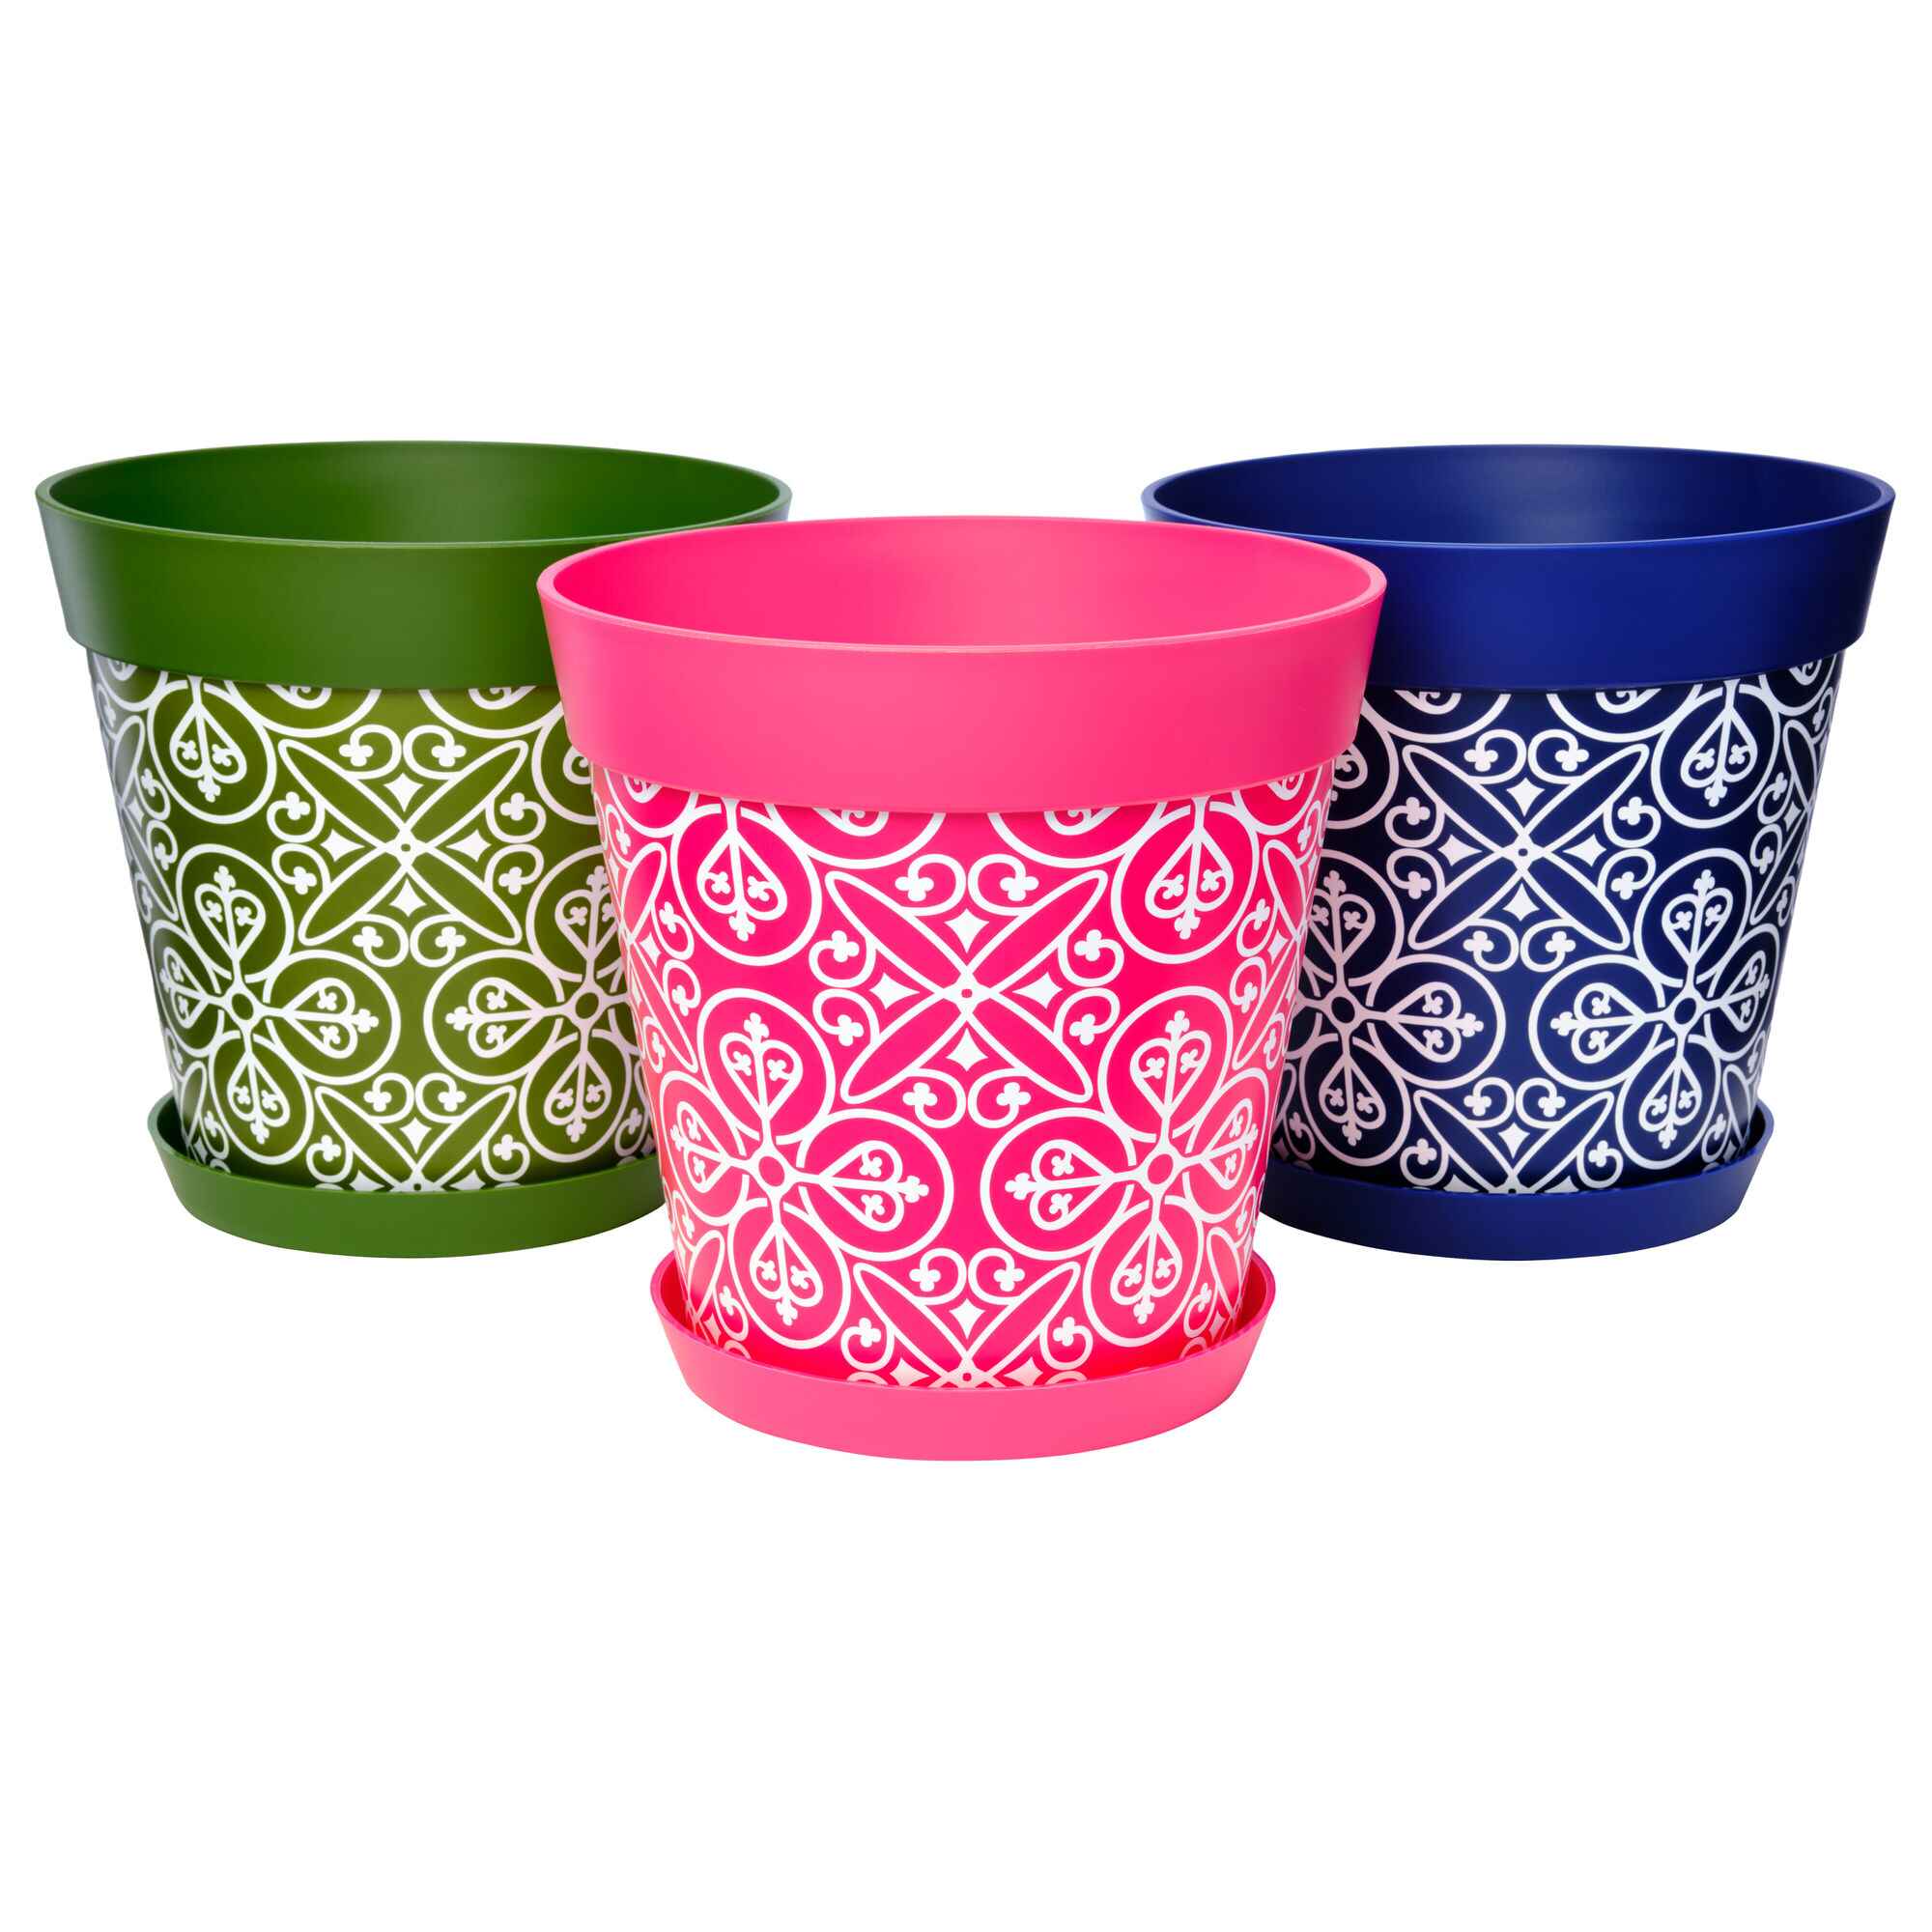 Picture of 3 Large 25cm Plastic Multi Colour Moroccan Style Indoor/Outdoor Flowerpots with Saucers 